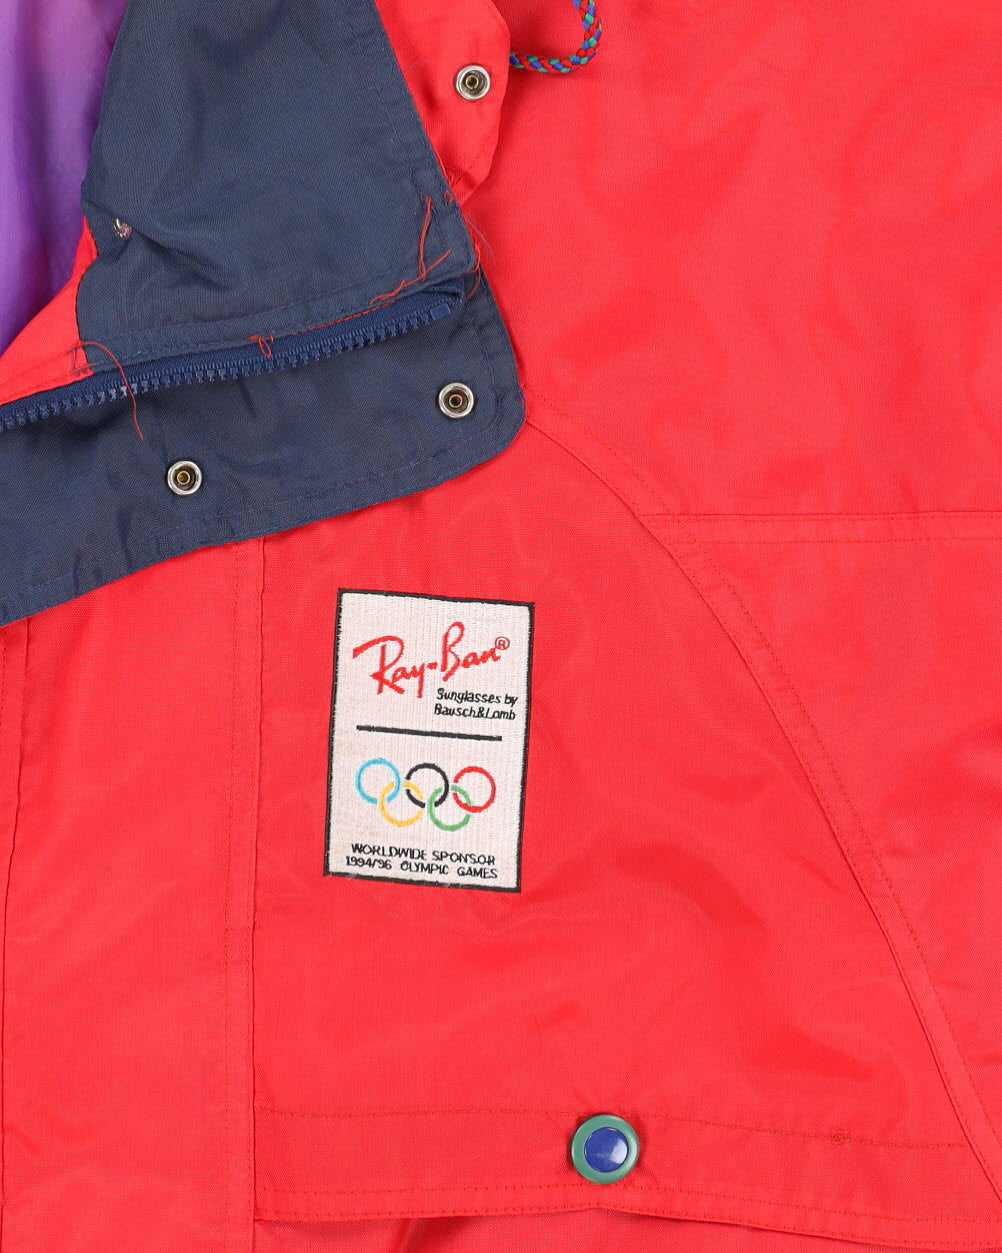 Vintage 1994/96 Olympic Games Red Raincoat By Ray Ban - M